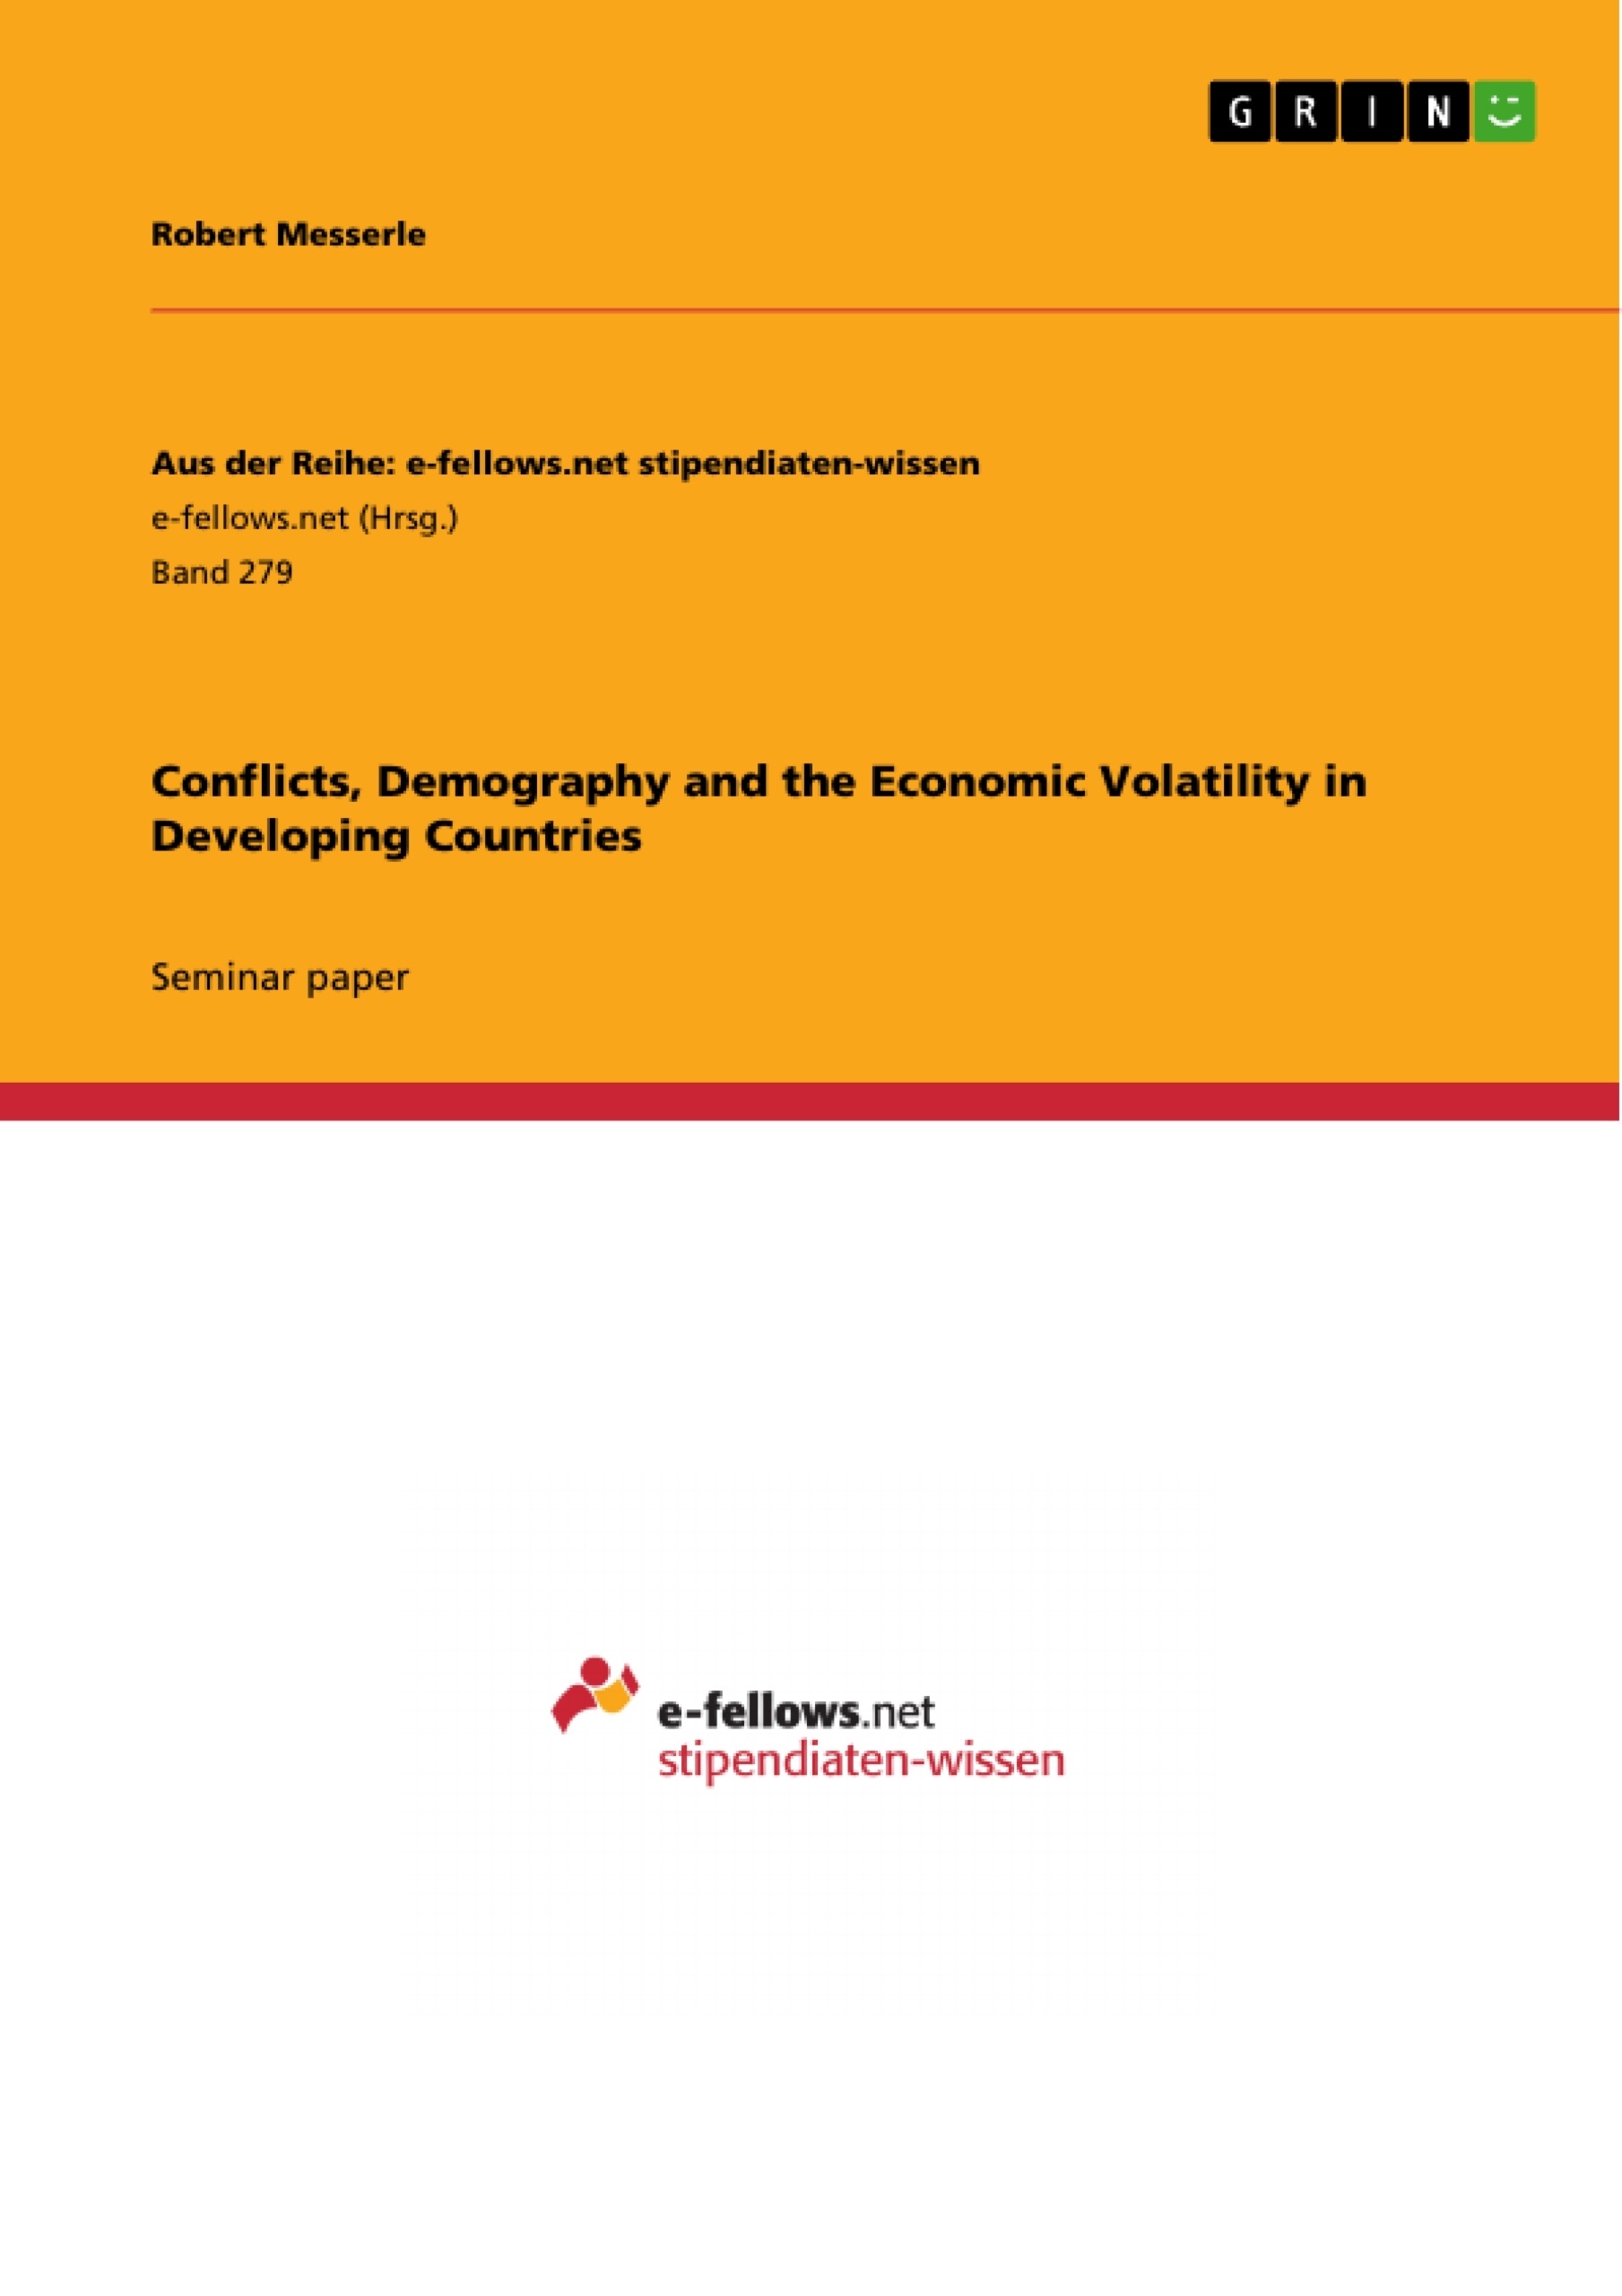 Title: Conflicts, Demography and the Economic Volatility in Developing Countries